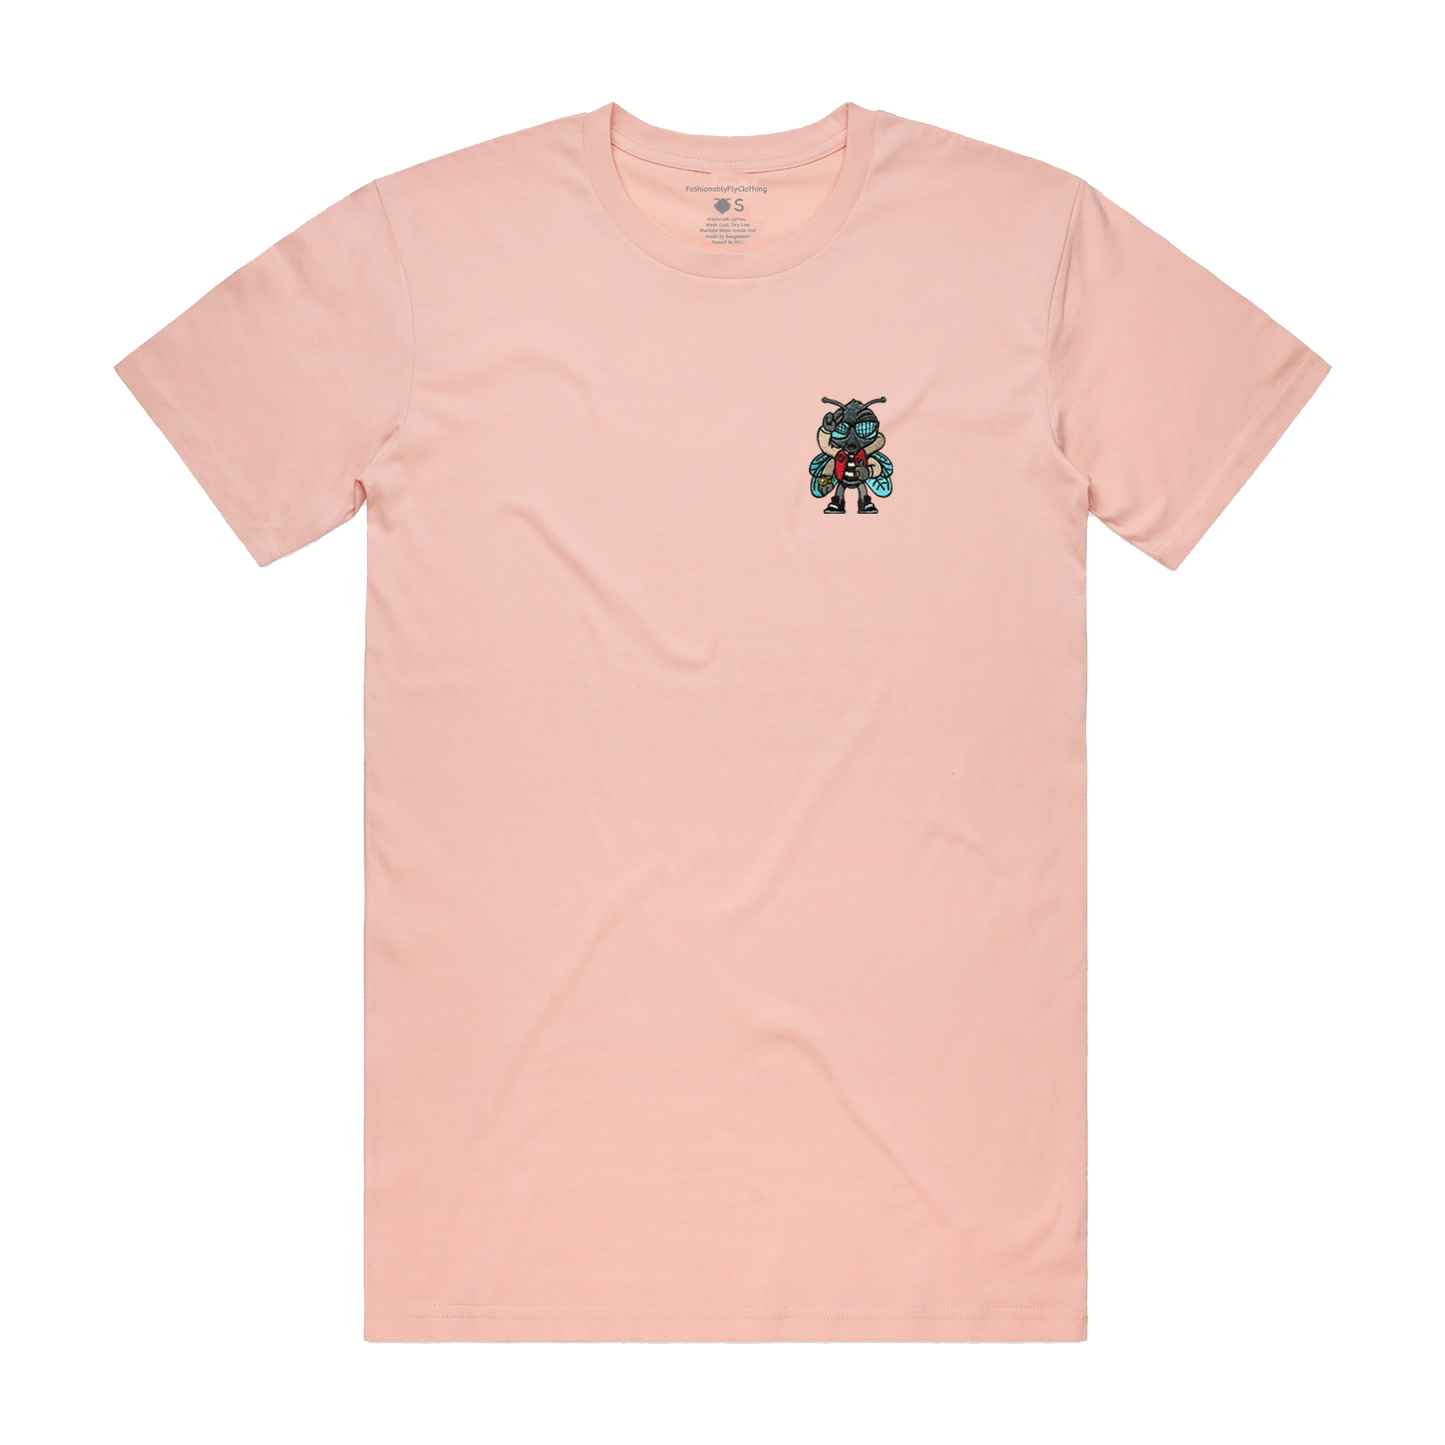 Fly Guy Embroidered Patch Unisex T-Shirt - Pale Pink